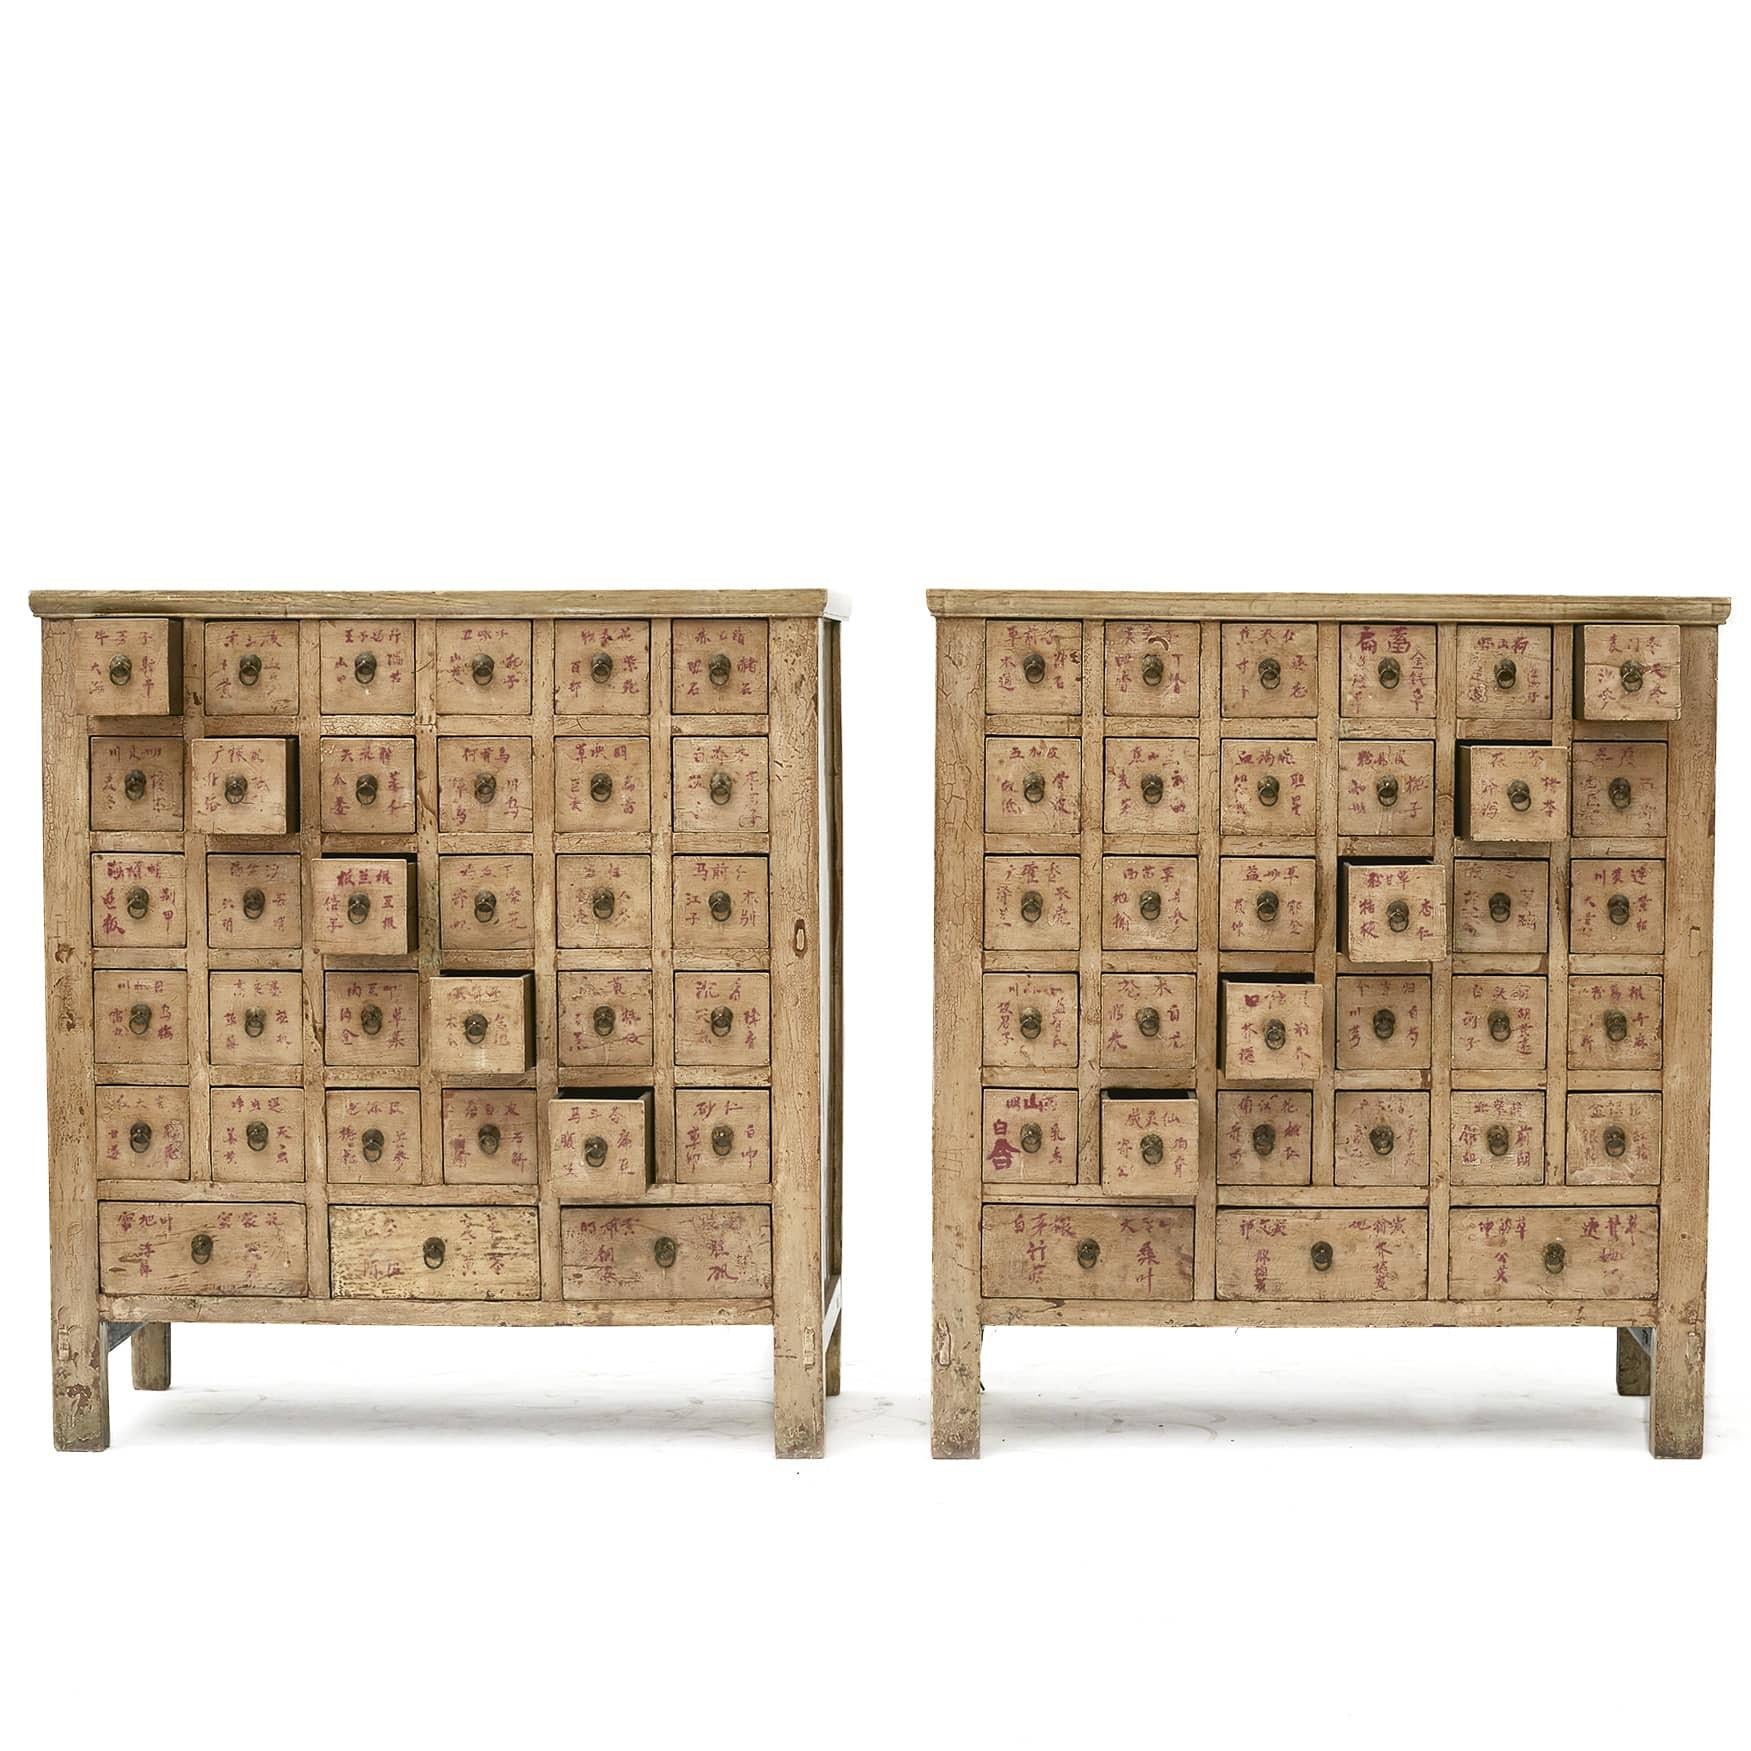 Pair of Chinese apothecary / pharmacy medicine chests. Made of elm wood with ivory lacquer.
Each with 33 drawers (30 small square drawers + 3 larger ).
These were used to store and organise Chinese herbs and the drawers were labeled according to the